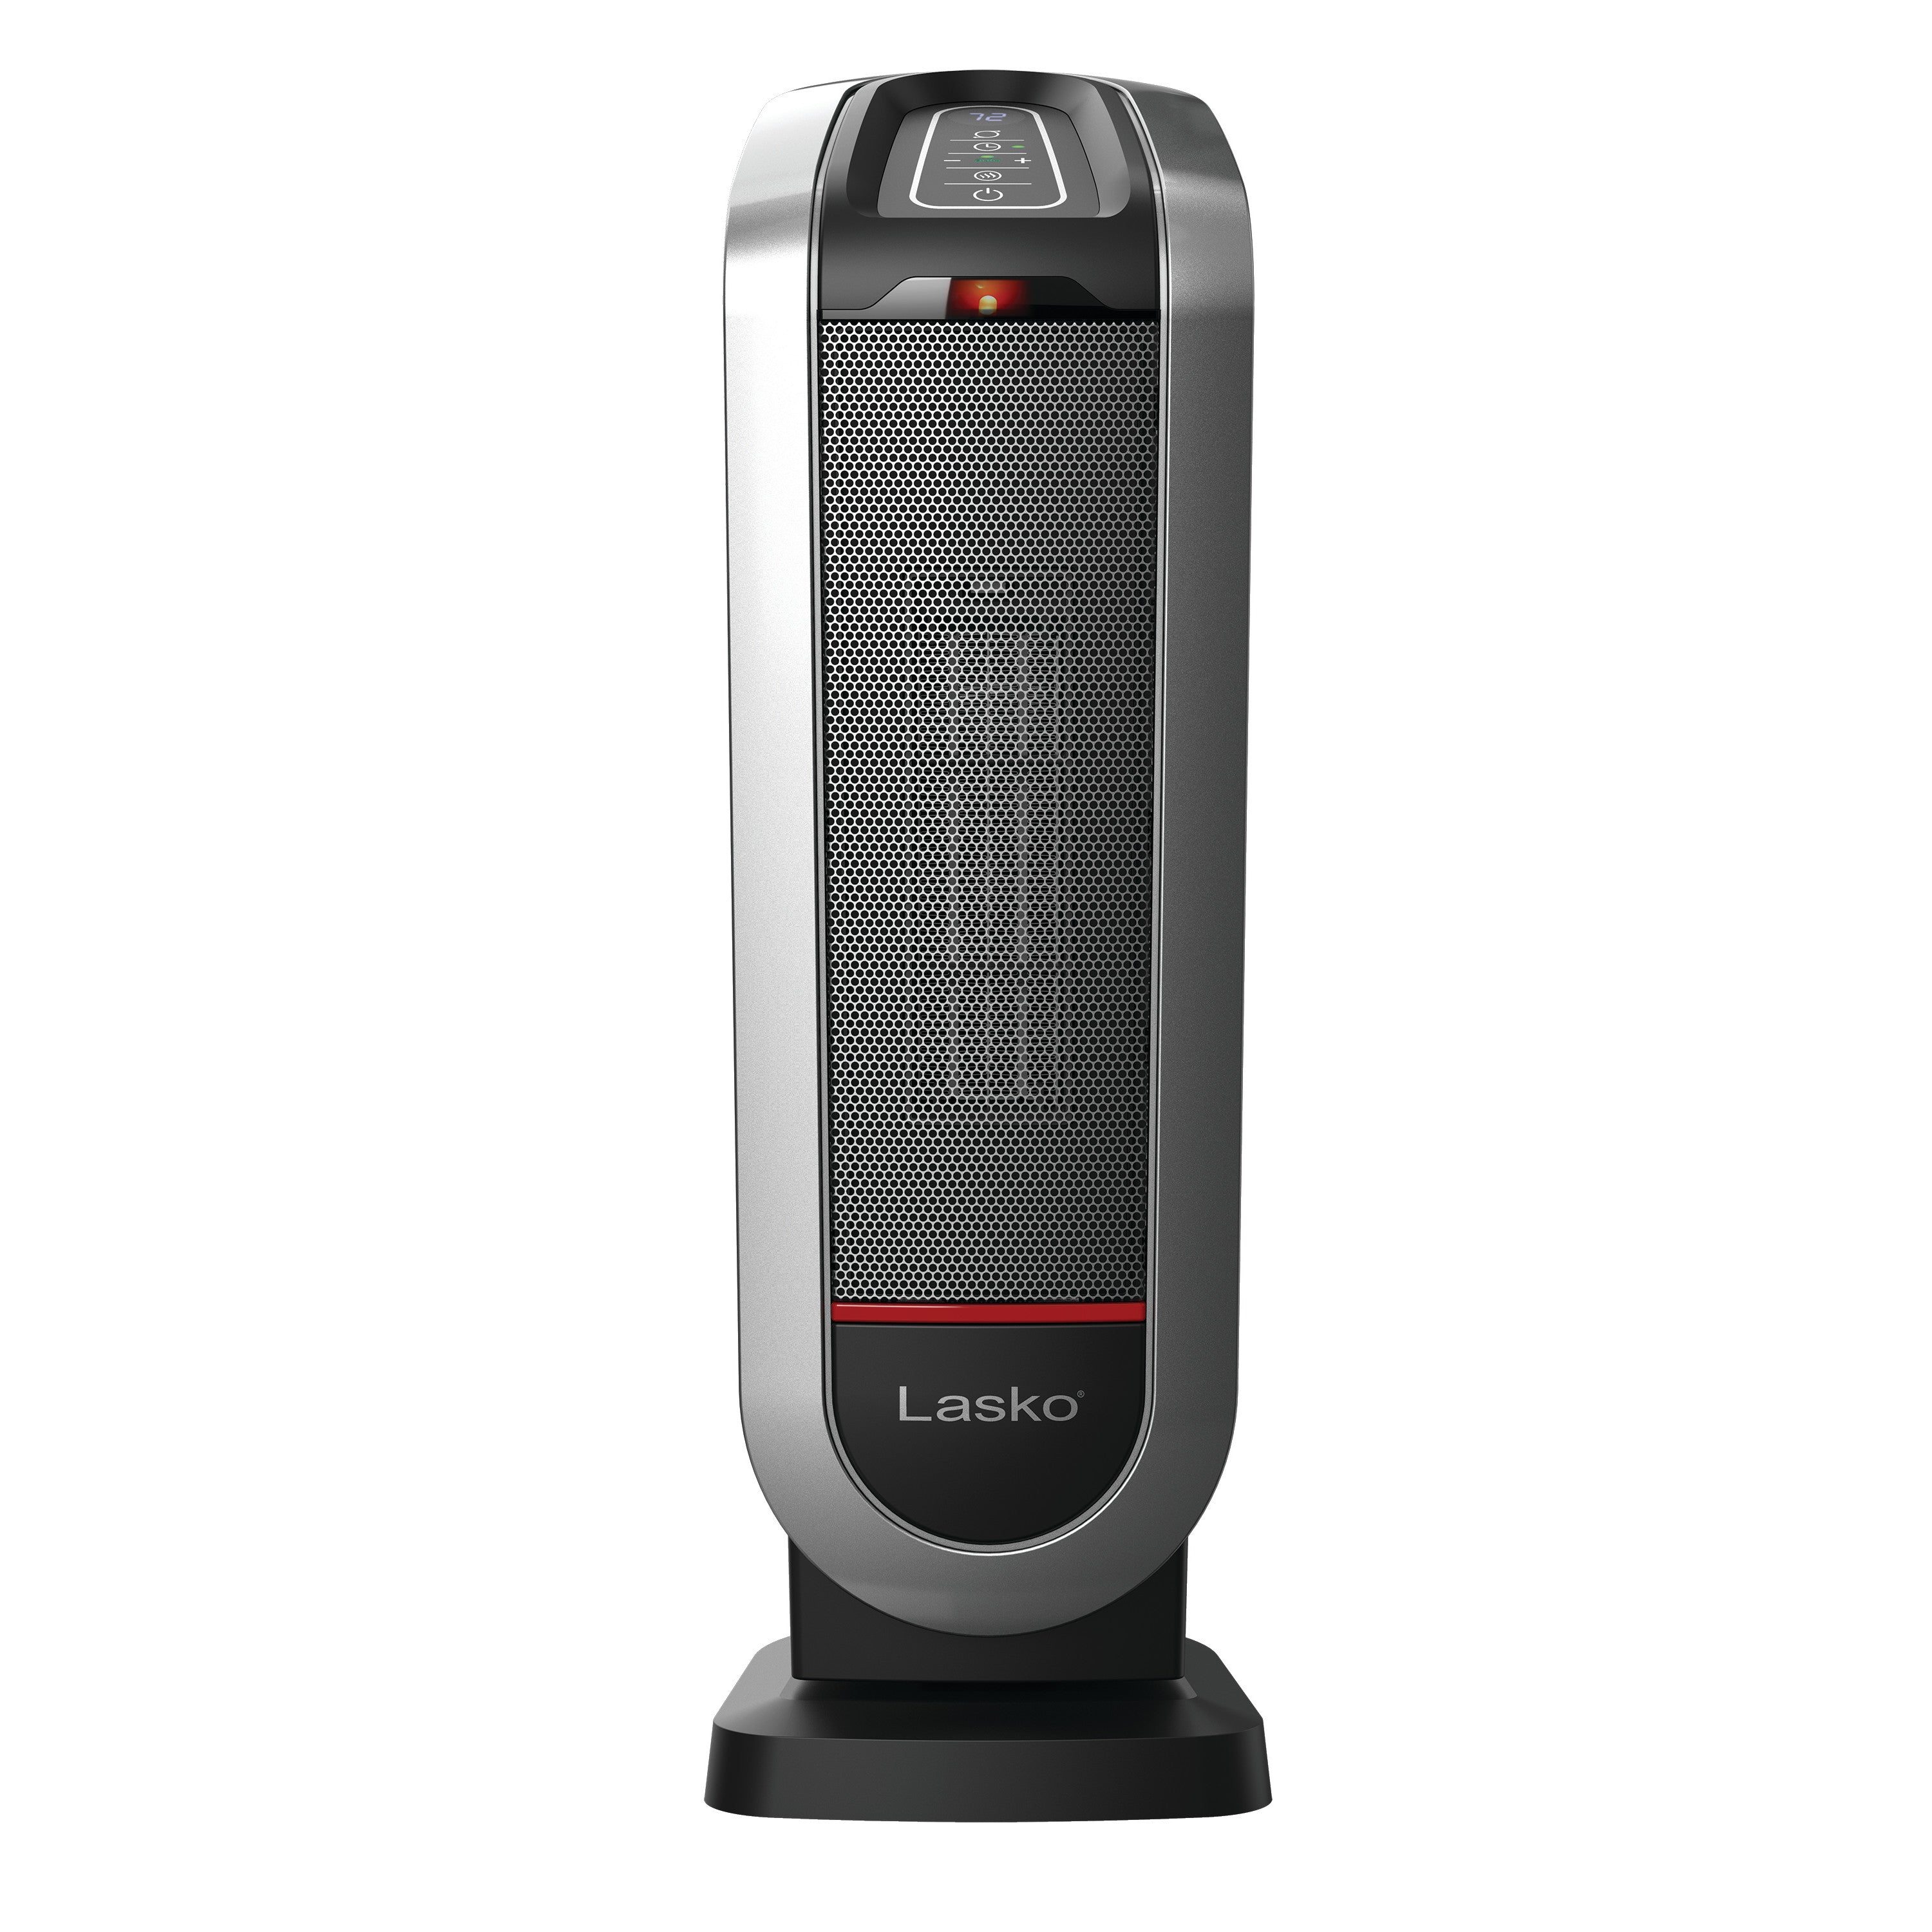 Lasko 1500W Oscillating Ceramic Tower Space Heater with Timer and Remote, CT22425, Black